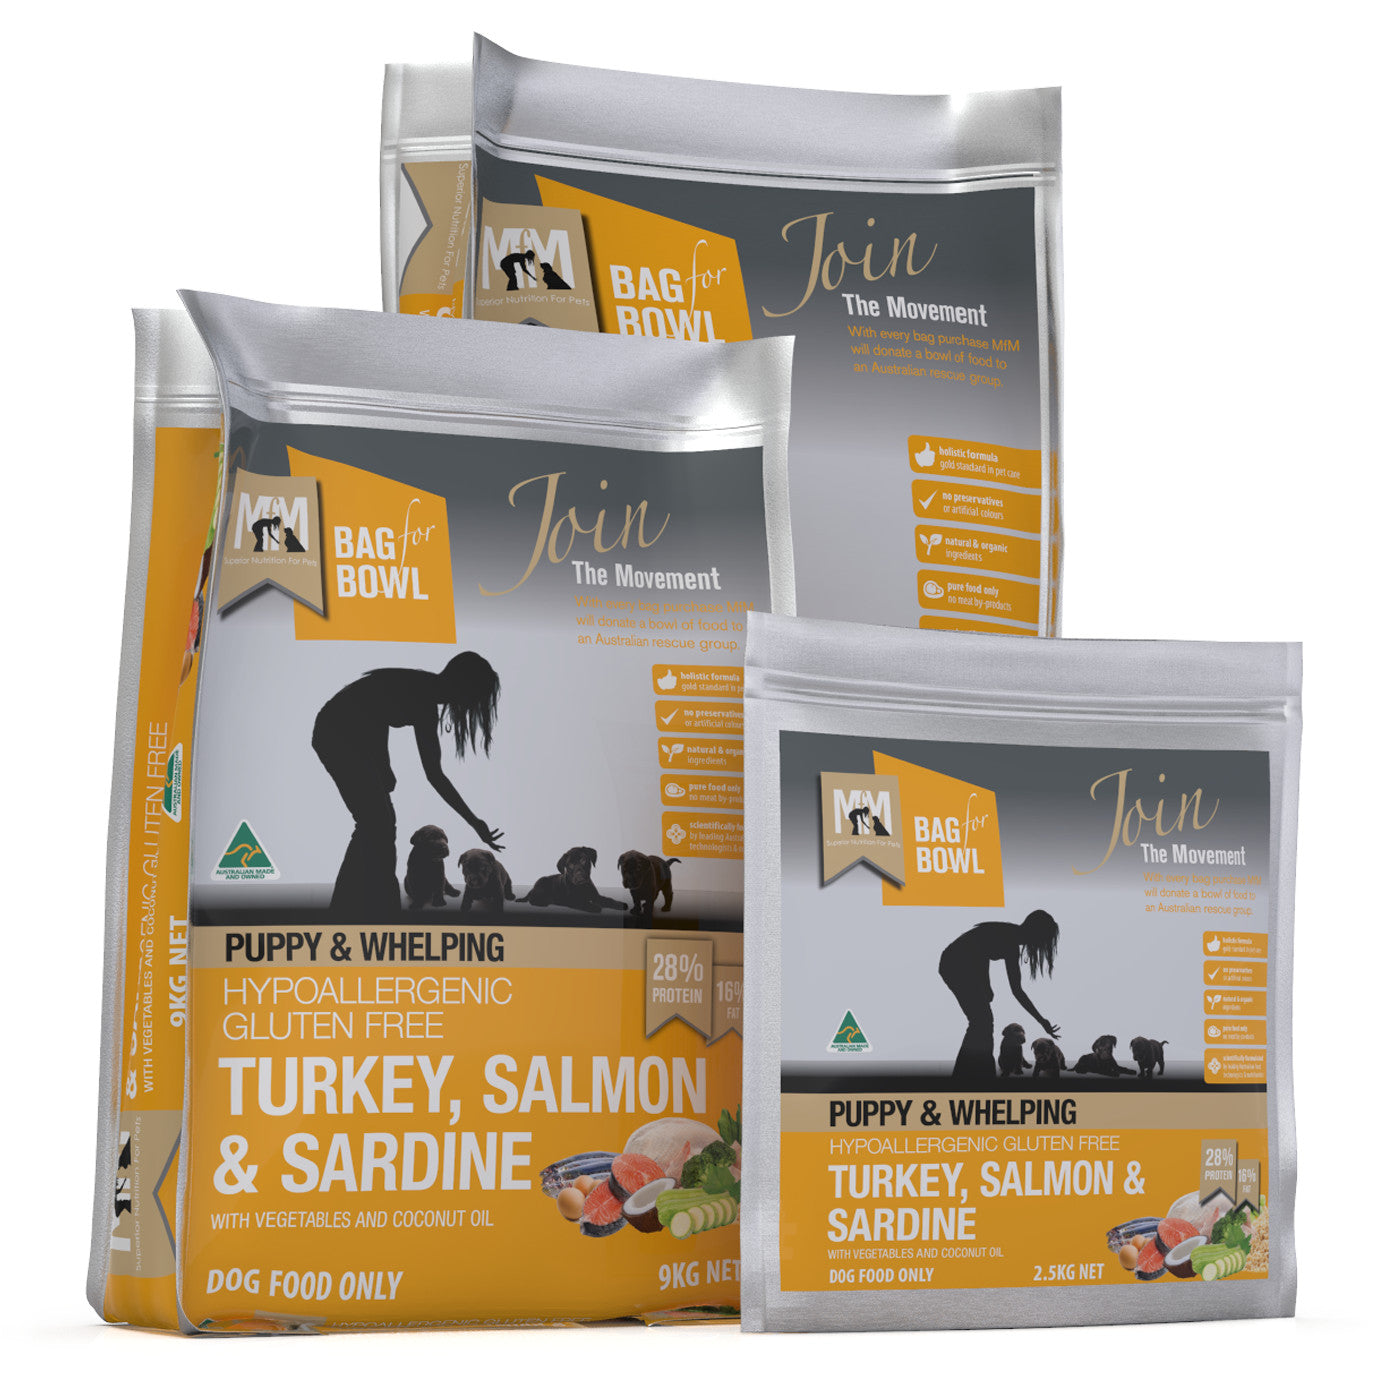 Meals for Mutts Turkey, Salmon & Sardine Puppy Food - 2.5kg, 9kg and 20kg.